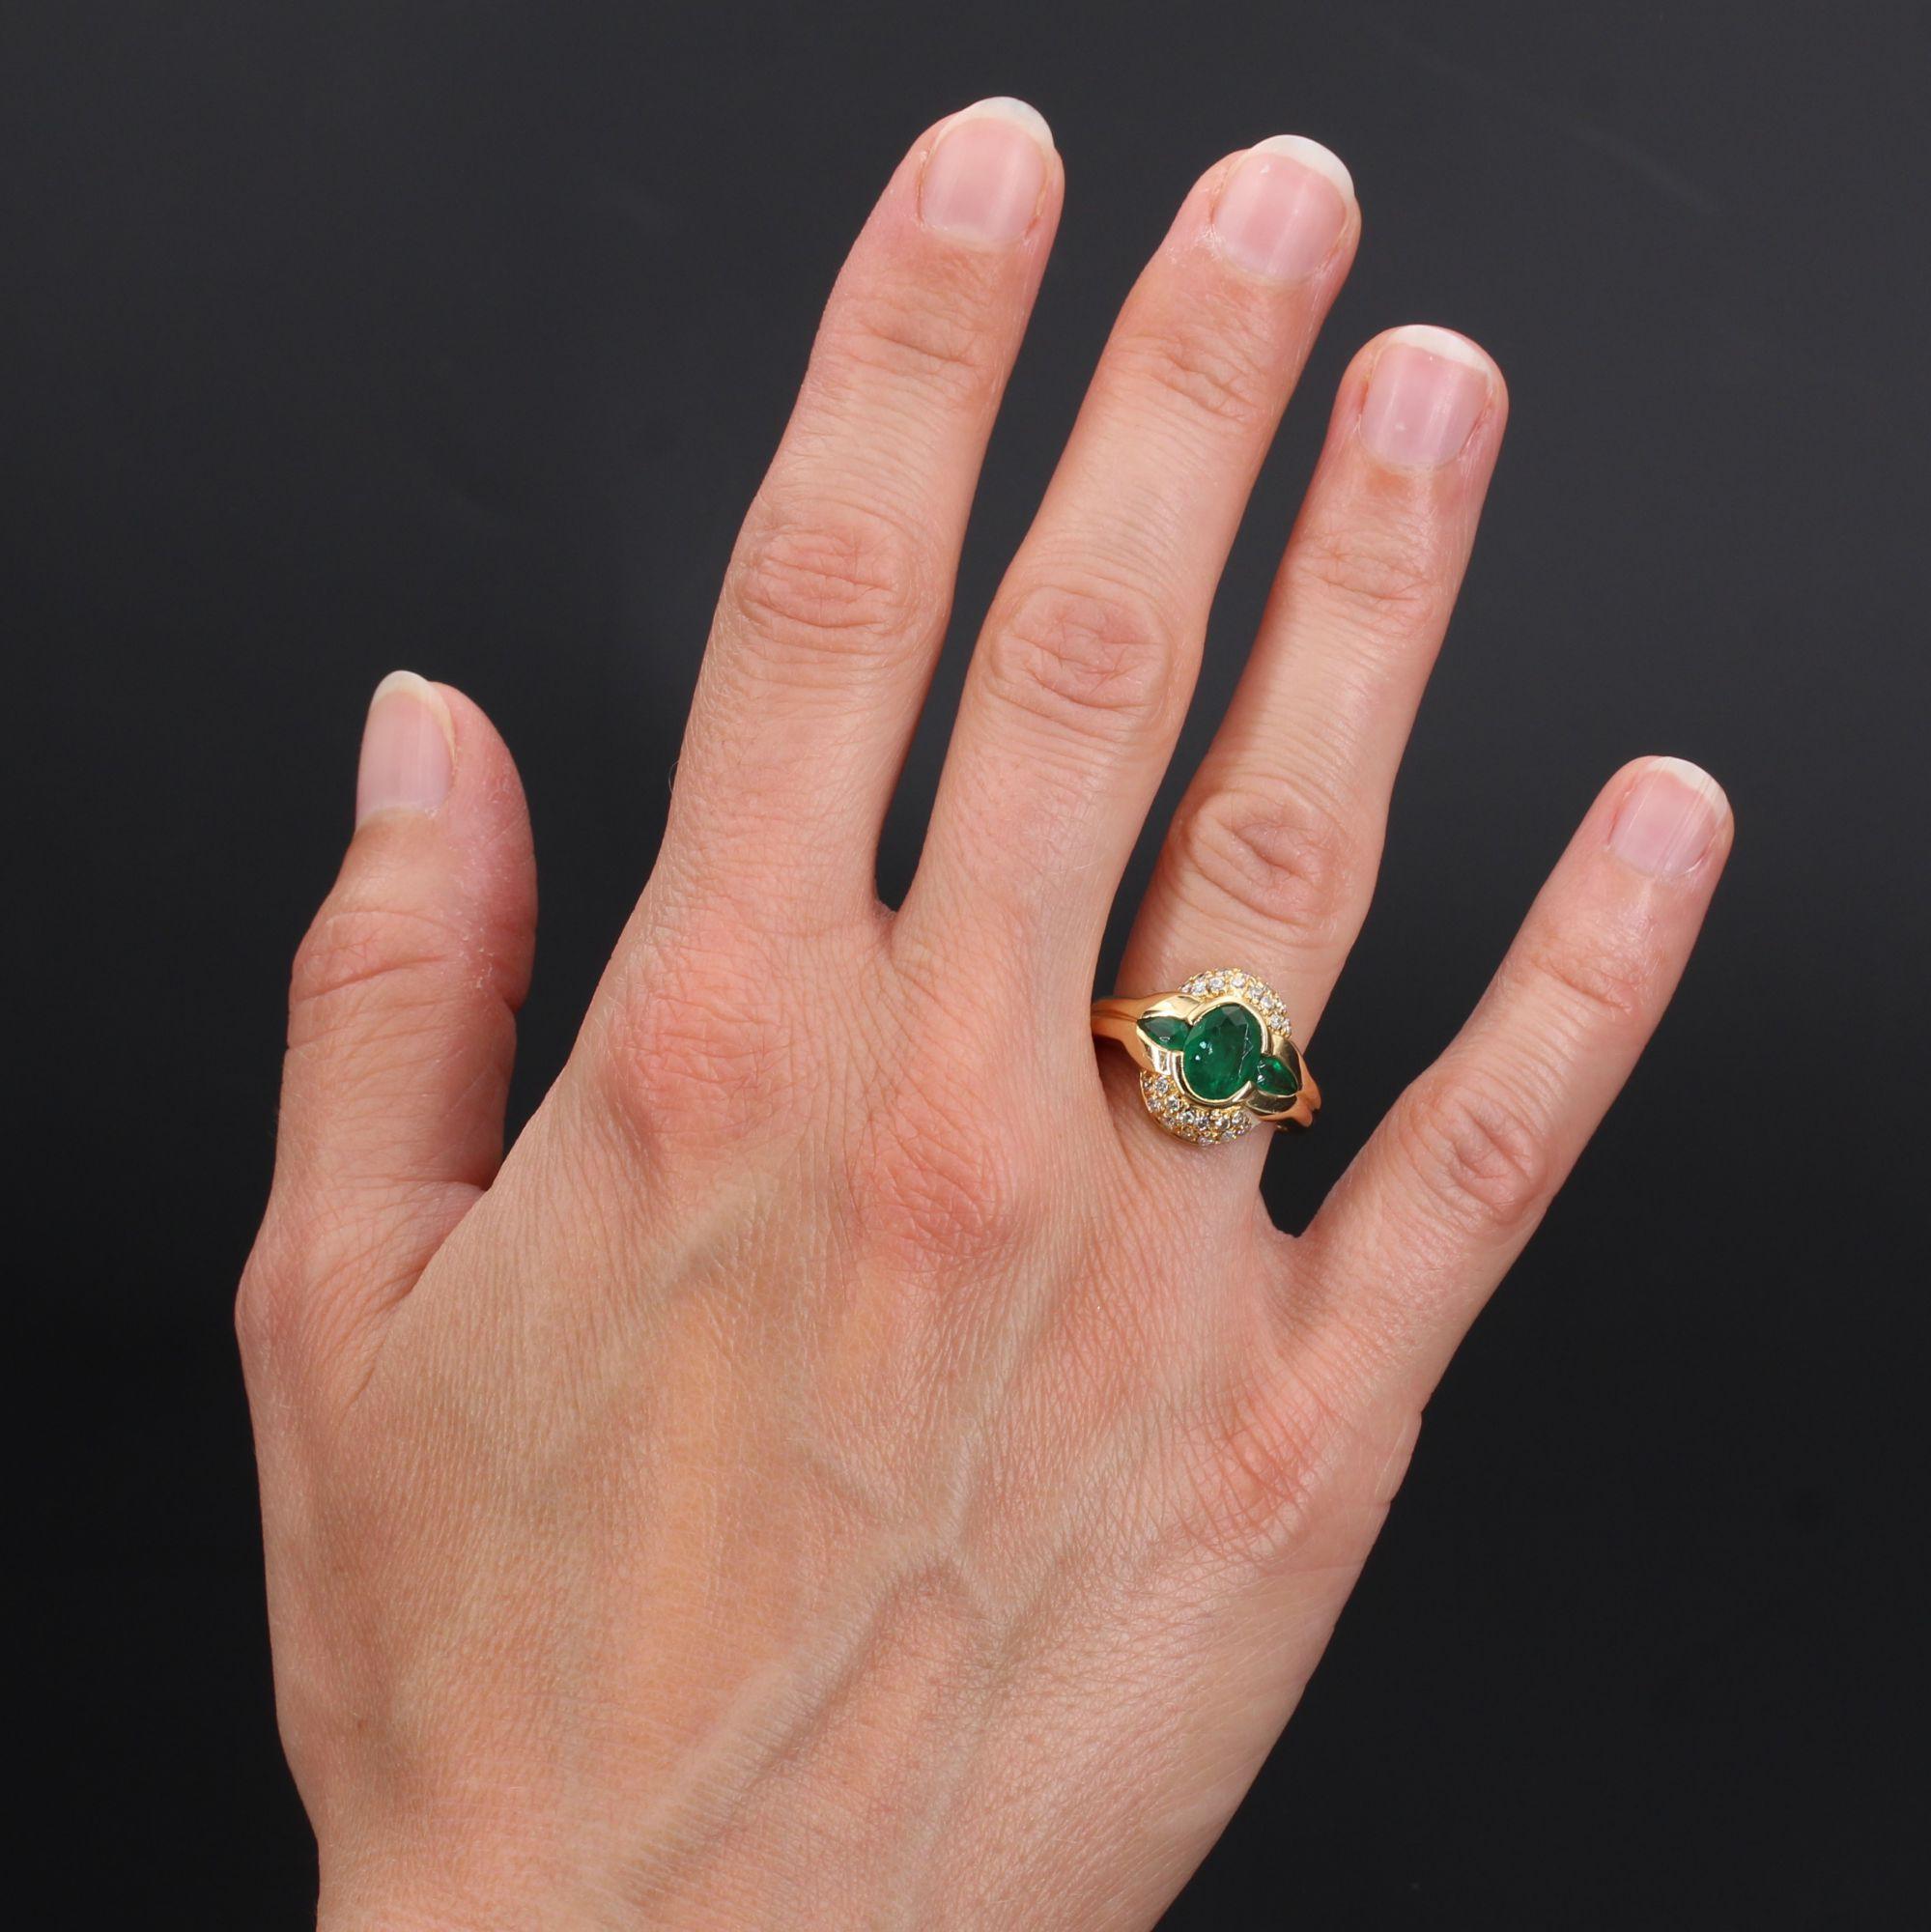 Ring in 18 karat yellow gold, eagle head hallmark.
This emerald ring is decorated with an oval emerald and emerald drops. It is bordered on each side by a pavement of brilliant-cut diamonds.
Weight of the main emerald : 0.85 carat approximately,